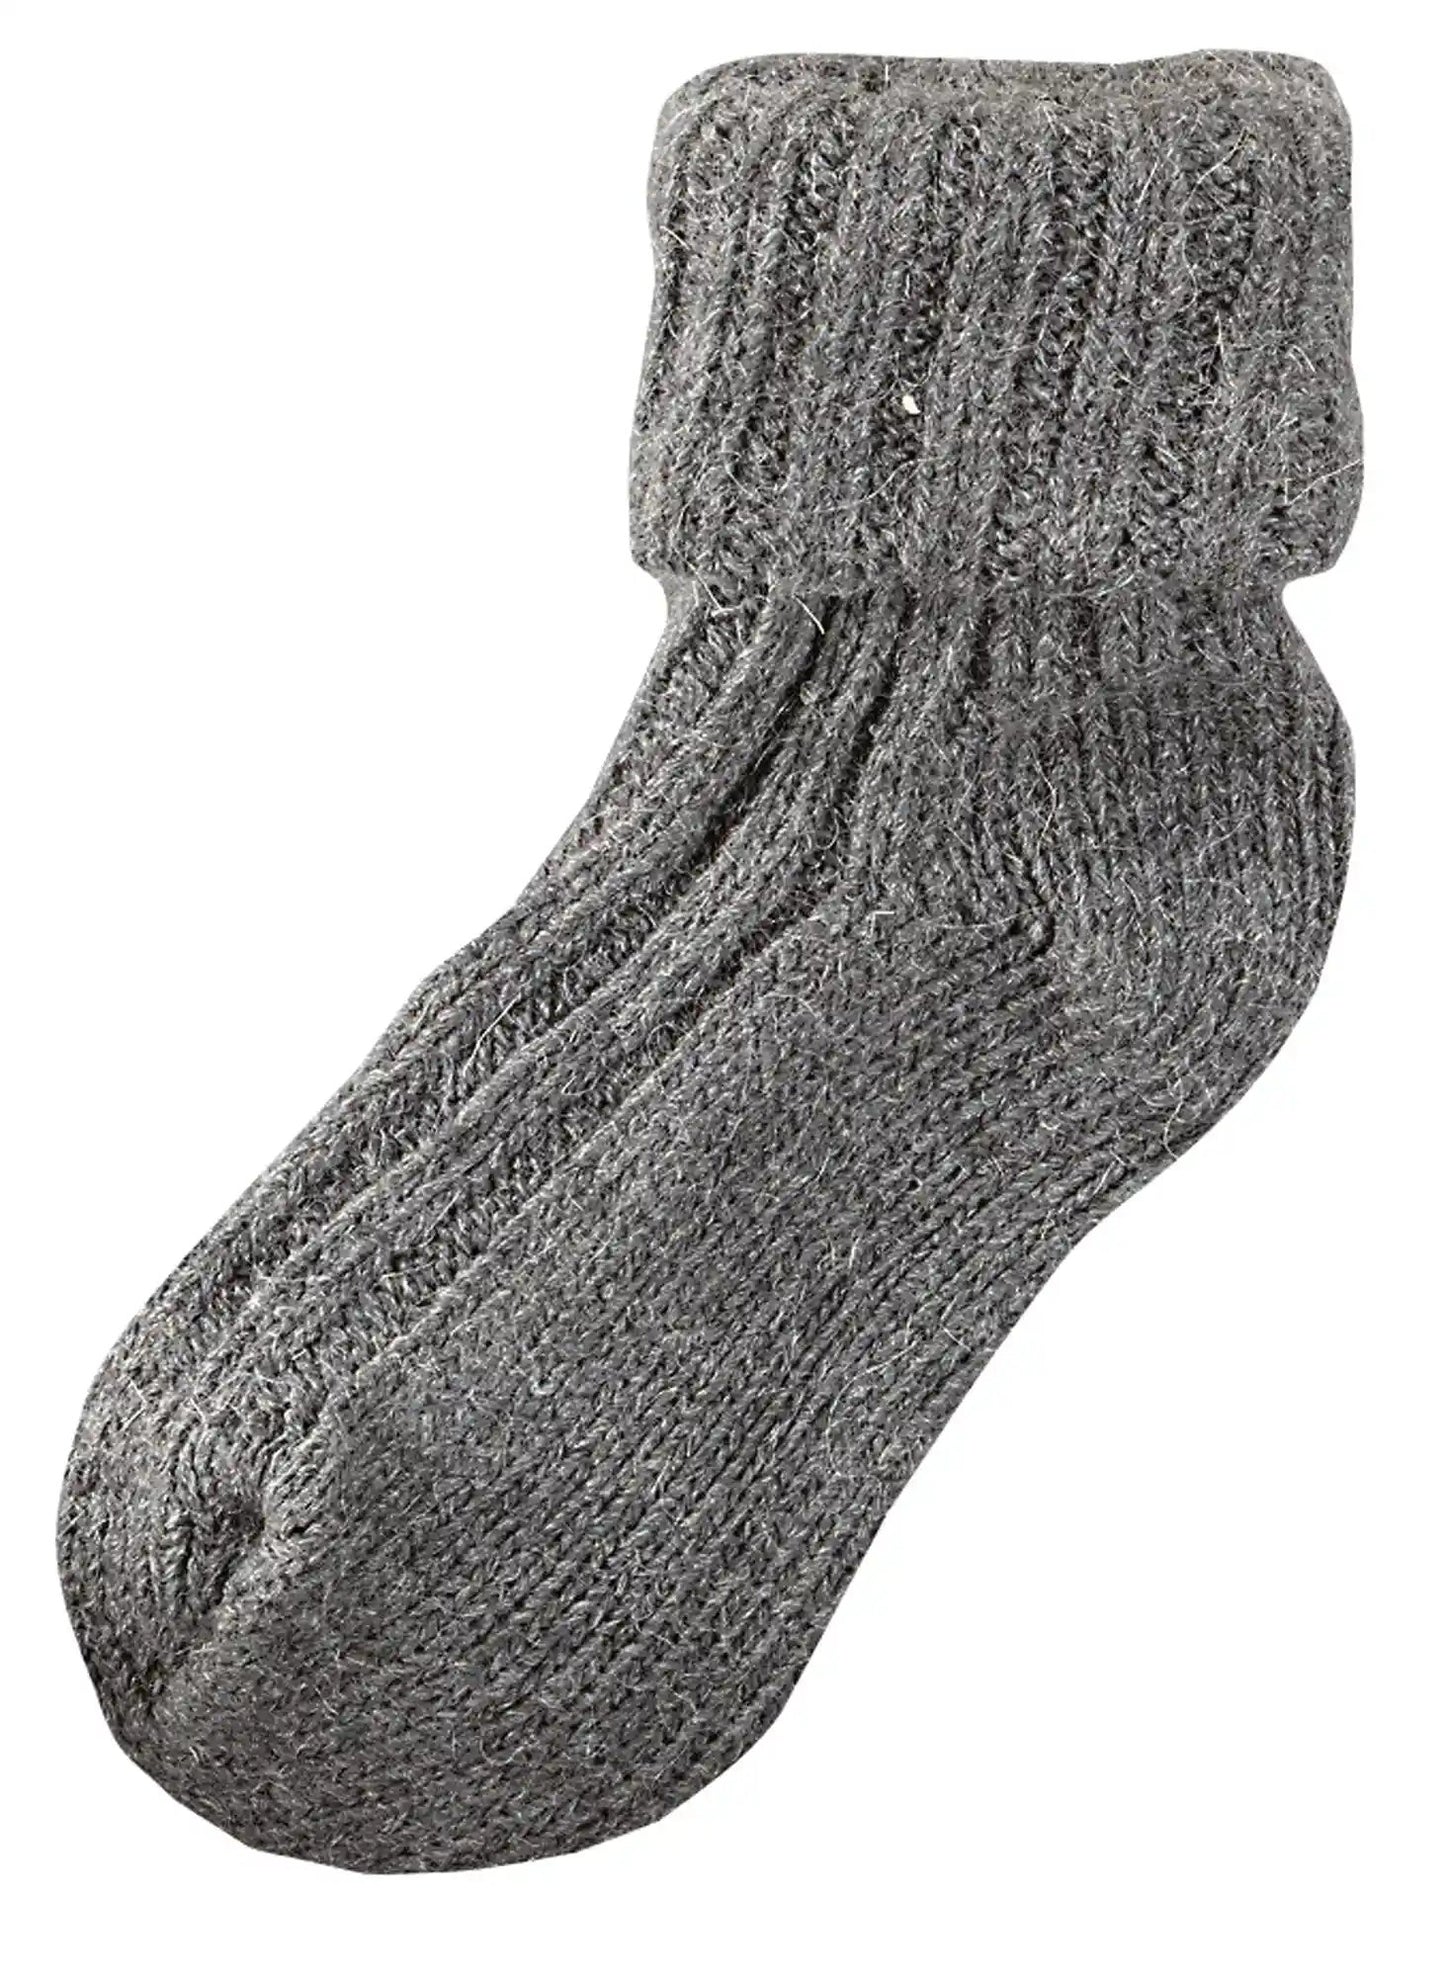 2 or 4 pairs of soft envelope socks with sheep and alpaca wool for men and women